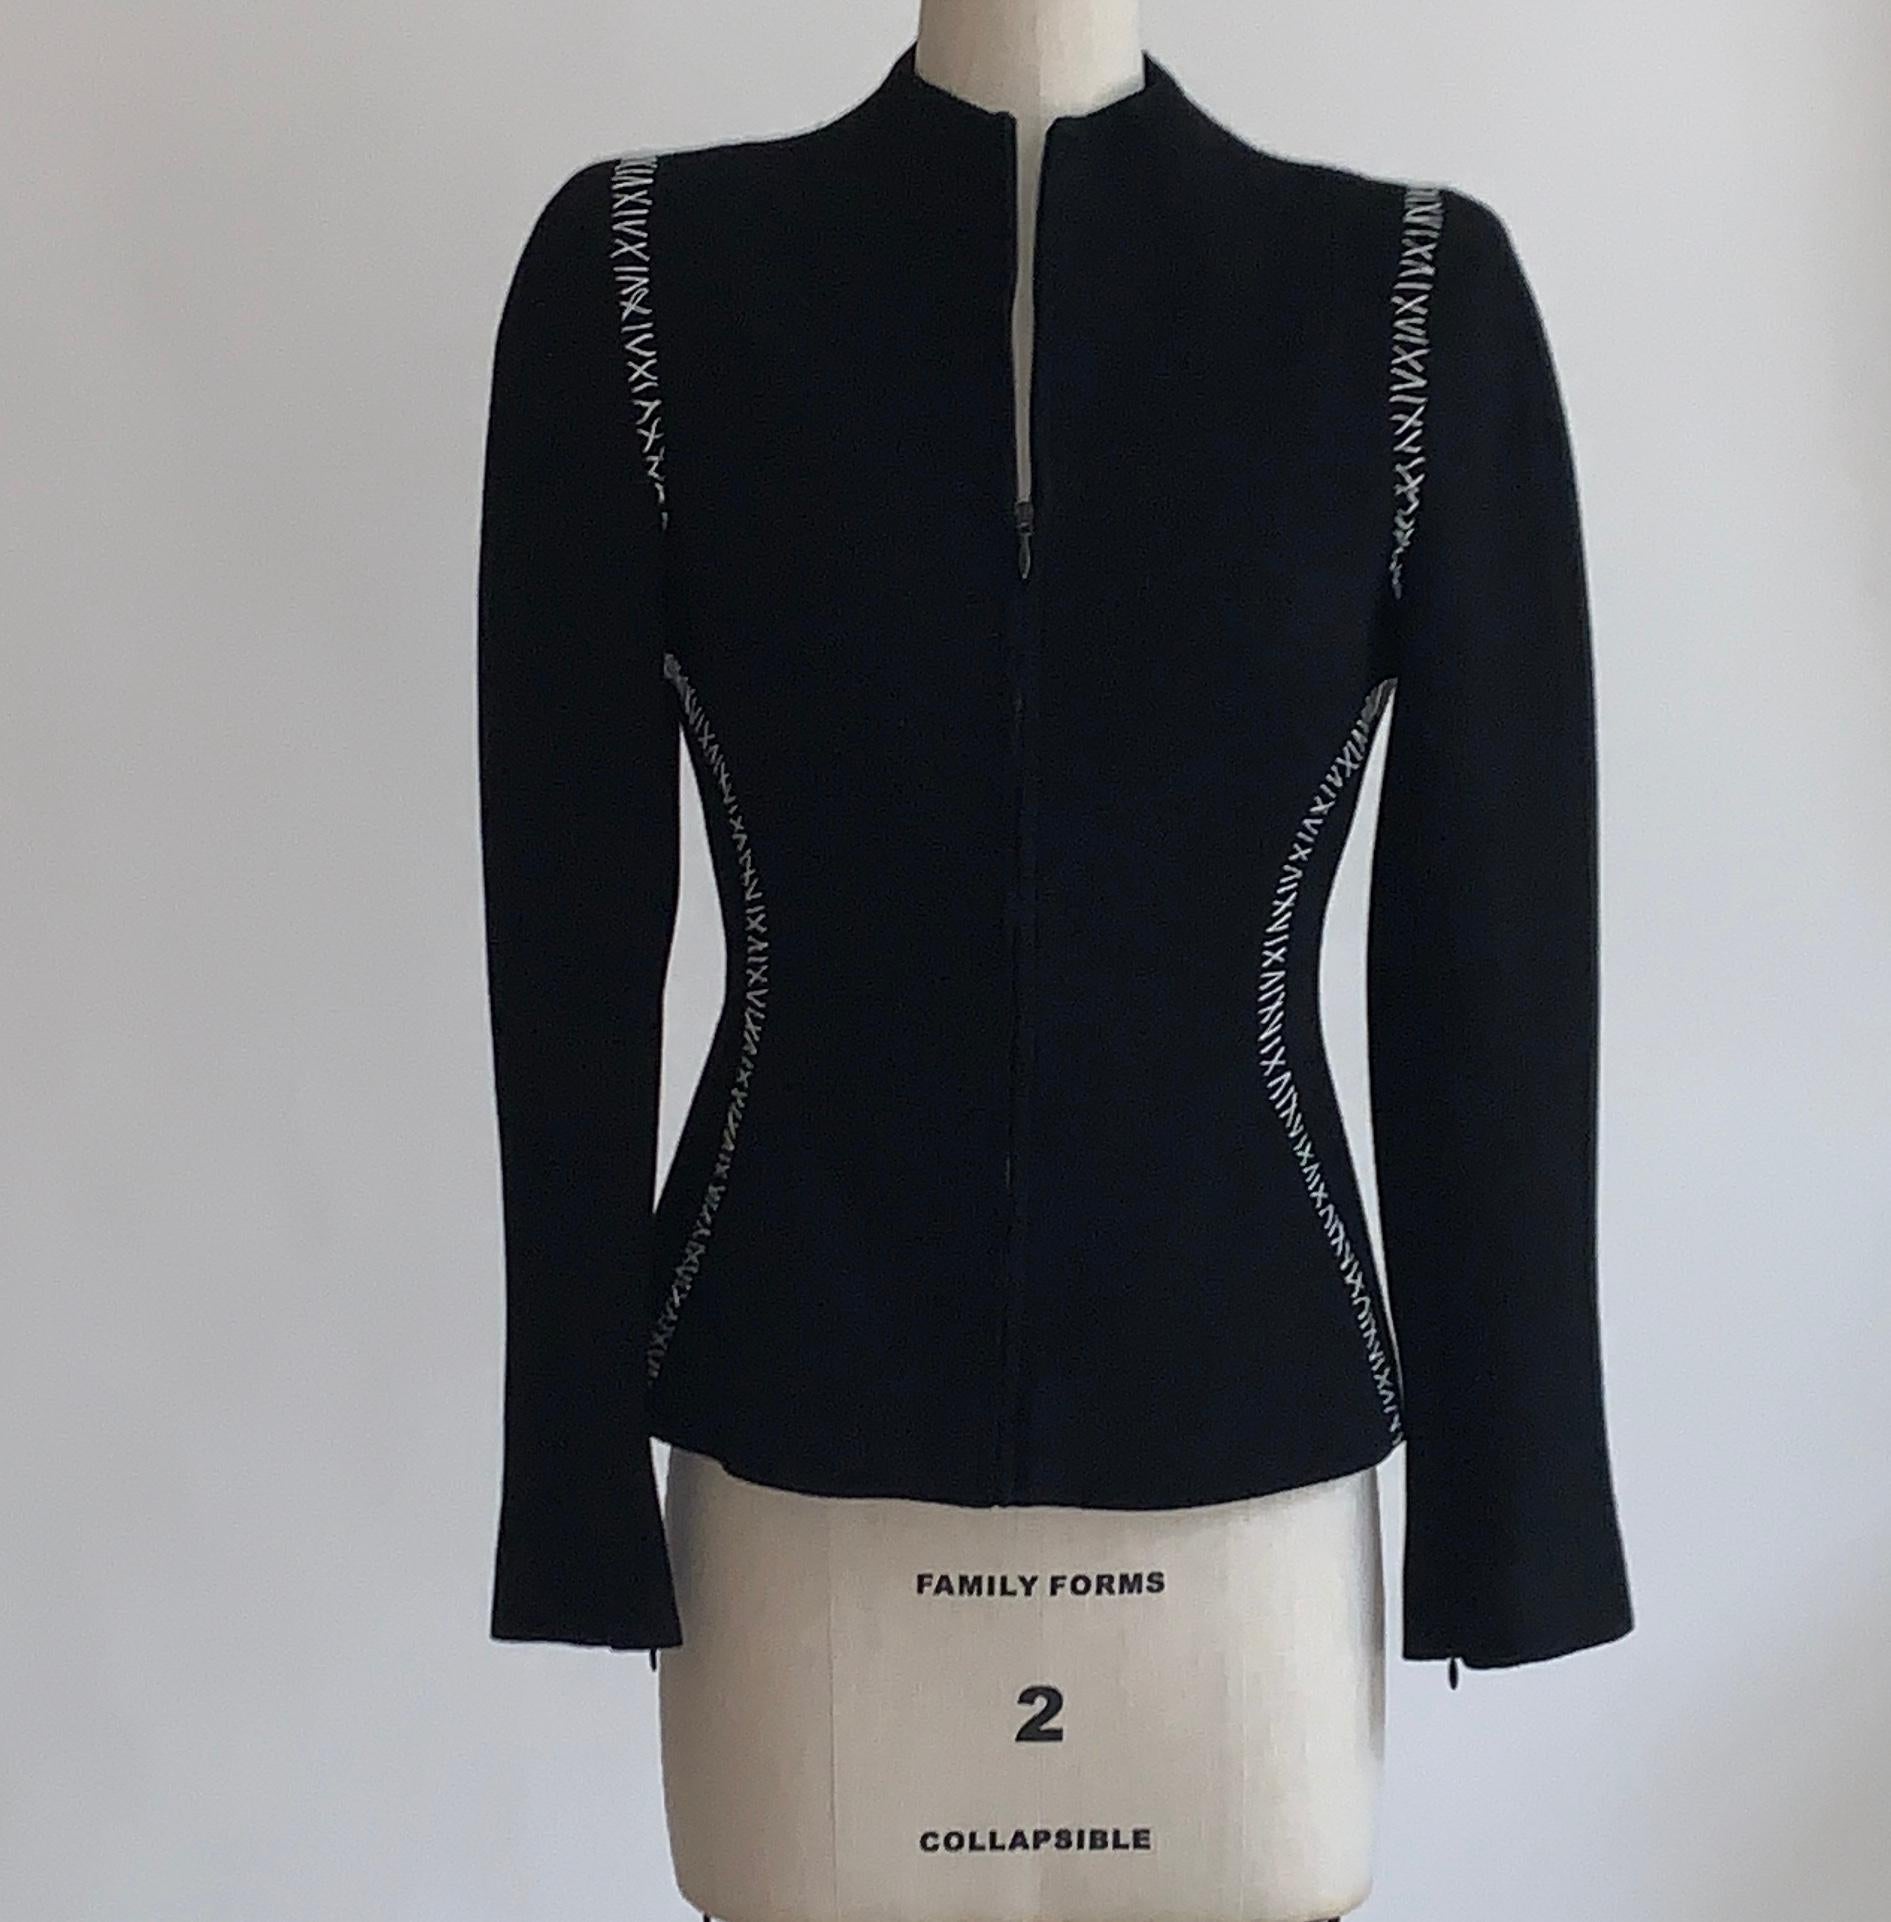 Alexander McQueen black textured wool jacket with contrasting white stitch detail. Zip front. Mid-weight padding at shoulders enhances structured silhouette, while zippers at cuff create an extra tailored sleeve. Chain at interior bottom hem